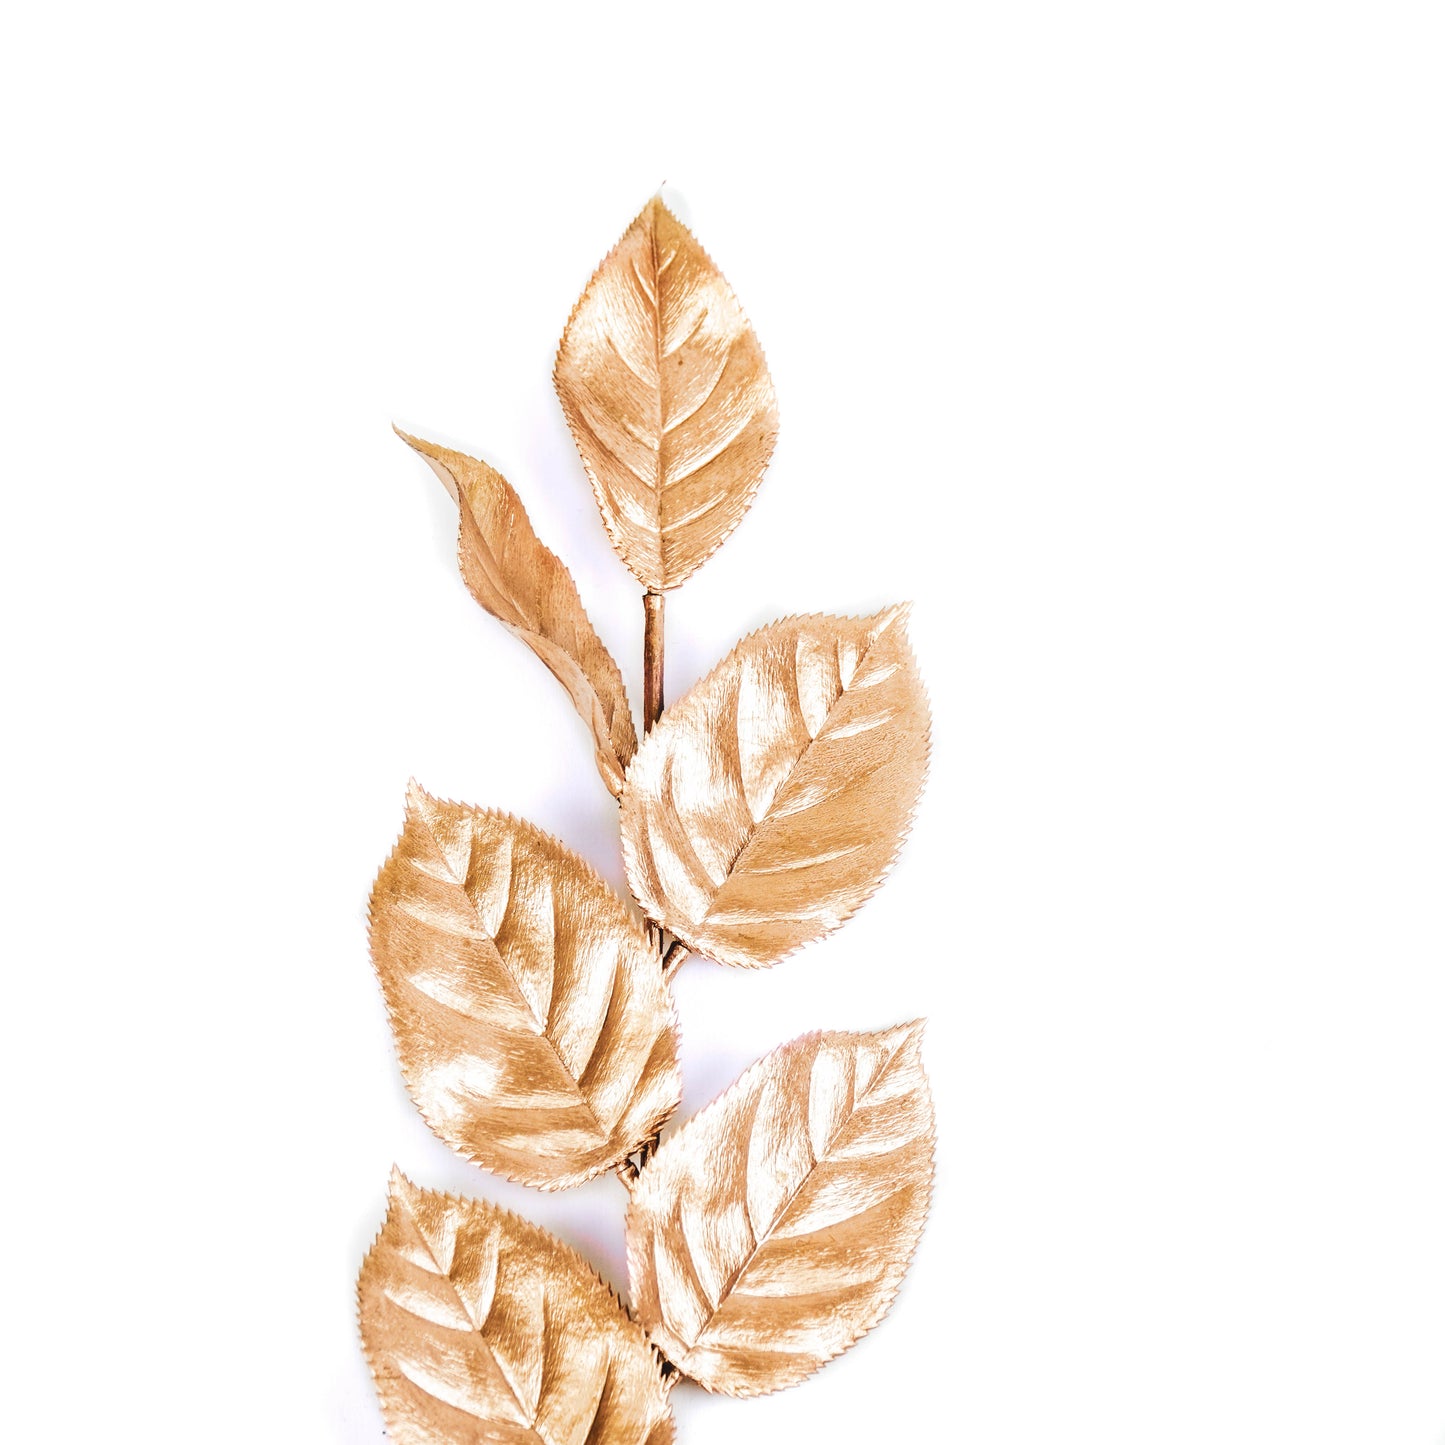 HV Golden Branch with leafs - 12 x 57 cm - Polysterene